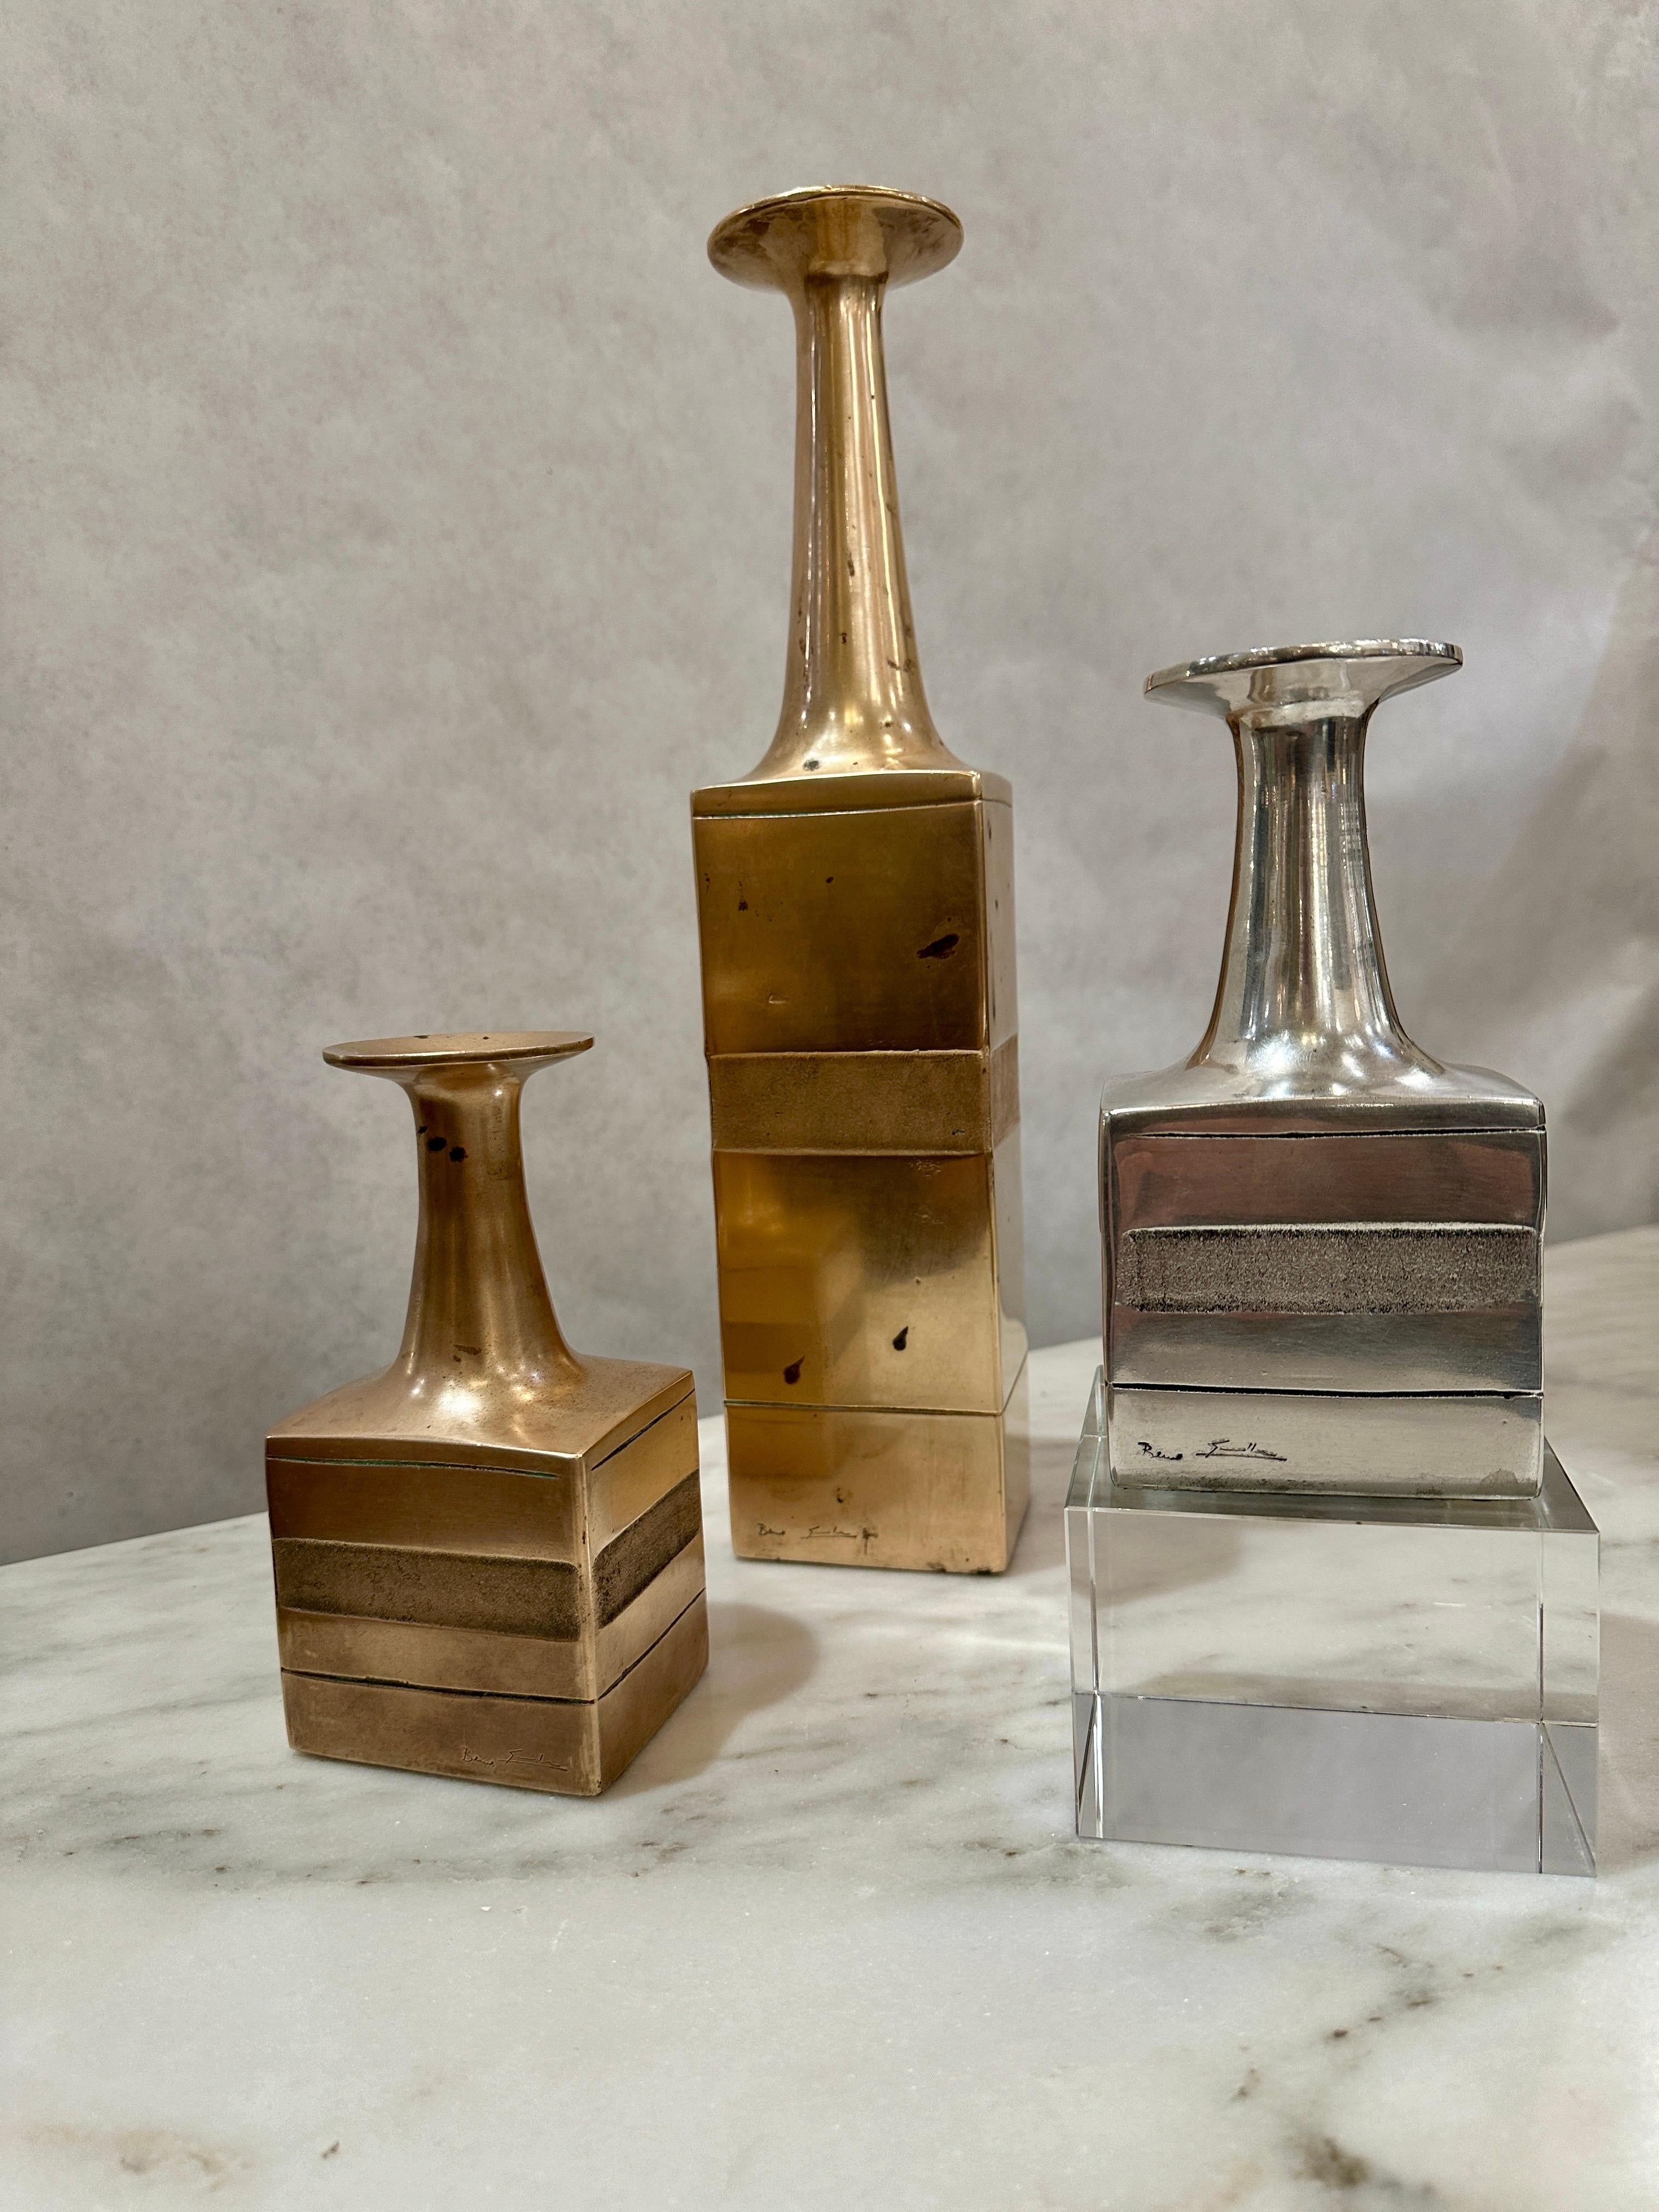 Rare Set of Bruno Gambone artist signed bronze bottle form vases - three of them (two in bronze and one in white bronze, which is VERY RARE).  Bottles with quadrangular section in cast bronze, elongated neck and flared rim.  Typical of Gambone's